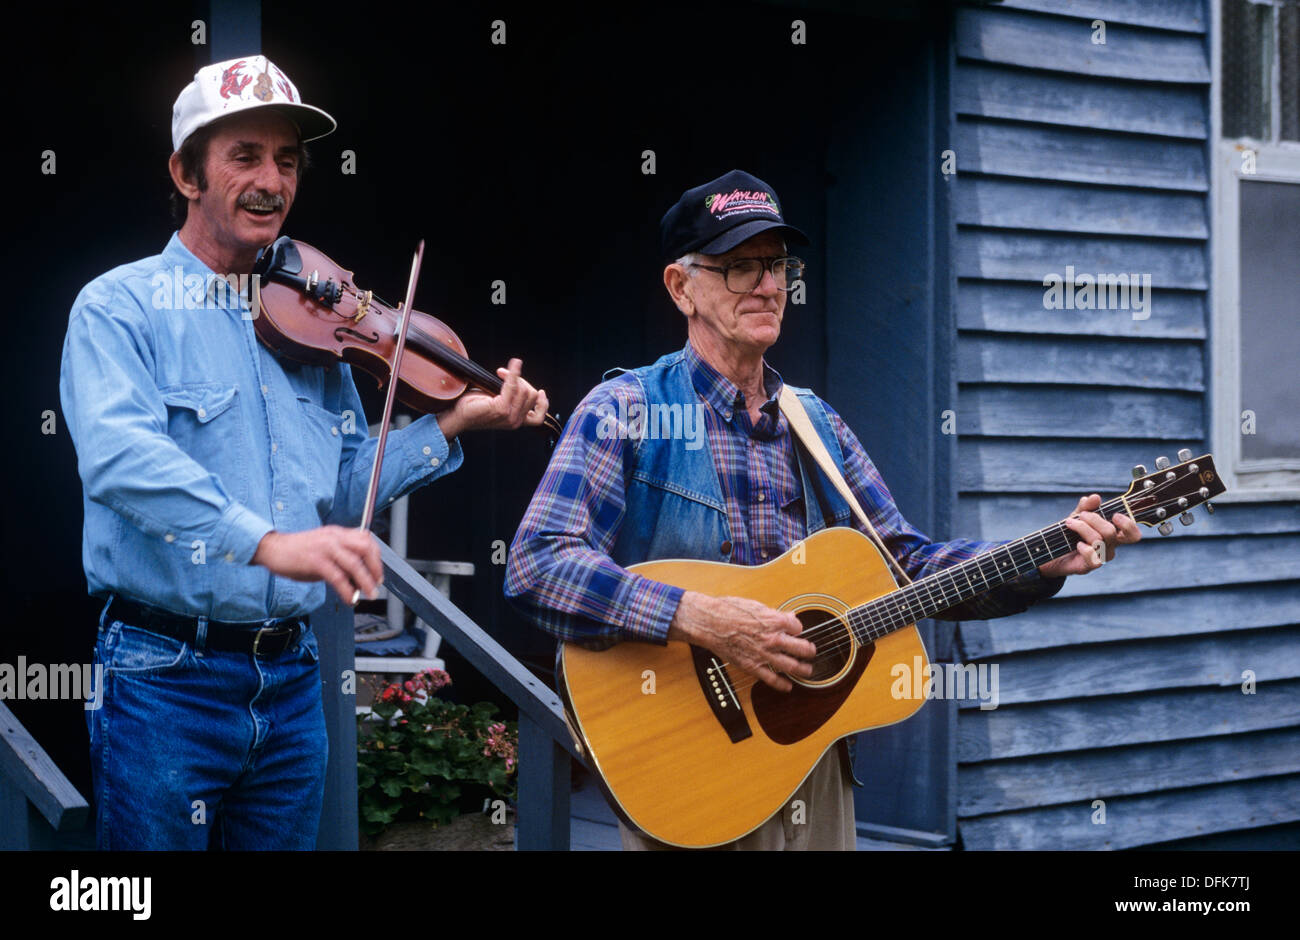 Guitar player, Eugene Dusenbery and fiddle player, Bobby Pellegrin, La Trouvaille restaurant, Chauvin, Louisiana, USA. Stock Photo